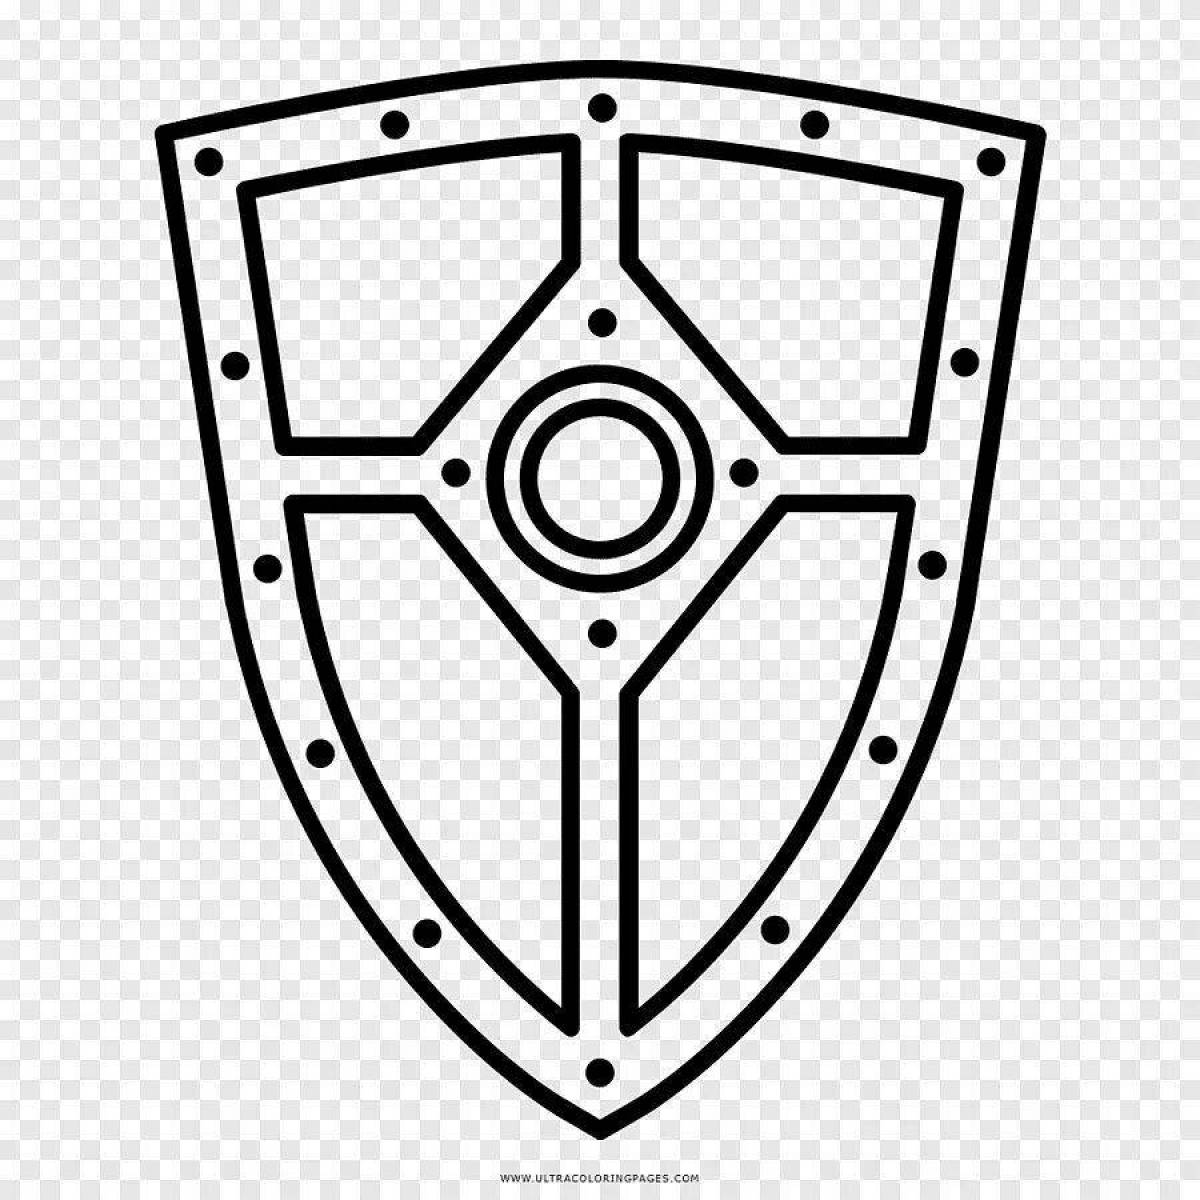 Colorfully detailed coloring book hero's shield